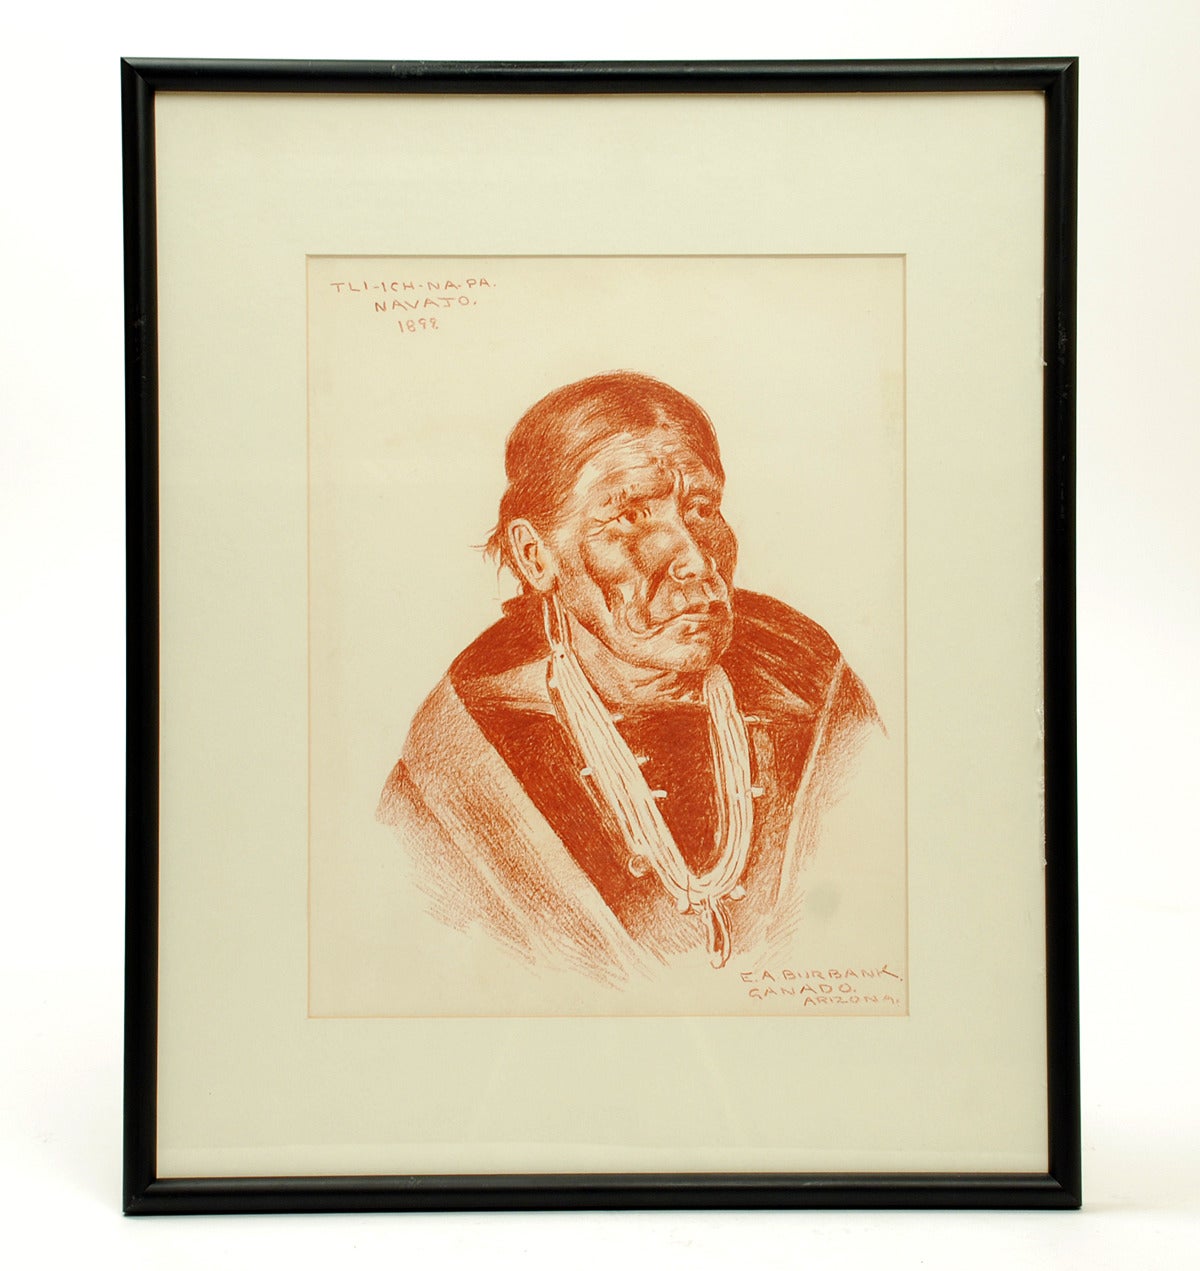 Rare original Conte crayon on paper of American Indian by well listed Taos and Santa Fe school painter Elbridge Ayer Burbank (1858-1949). Signed (lower right) and inscribed 'Tli-Ich-Na-Pa. / Navajo. / 1899.' and 'Ganado. Arizona.'

Dimensions: